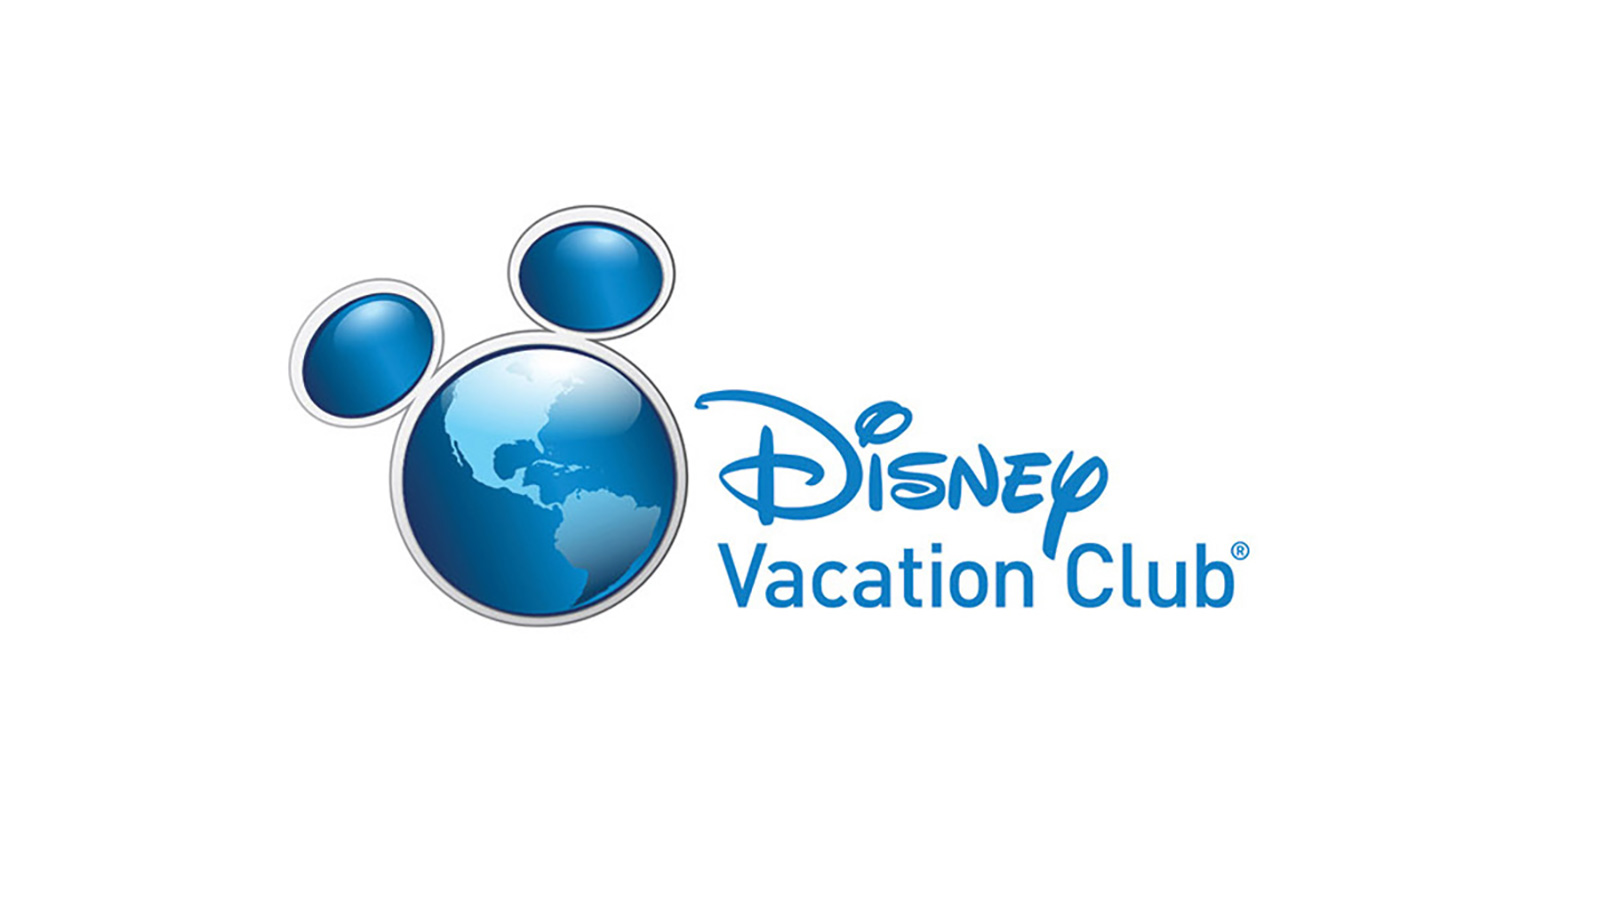 disney-vacation-club-announces-interval-international-as-exclusive-new